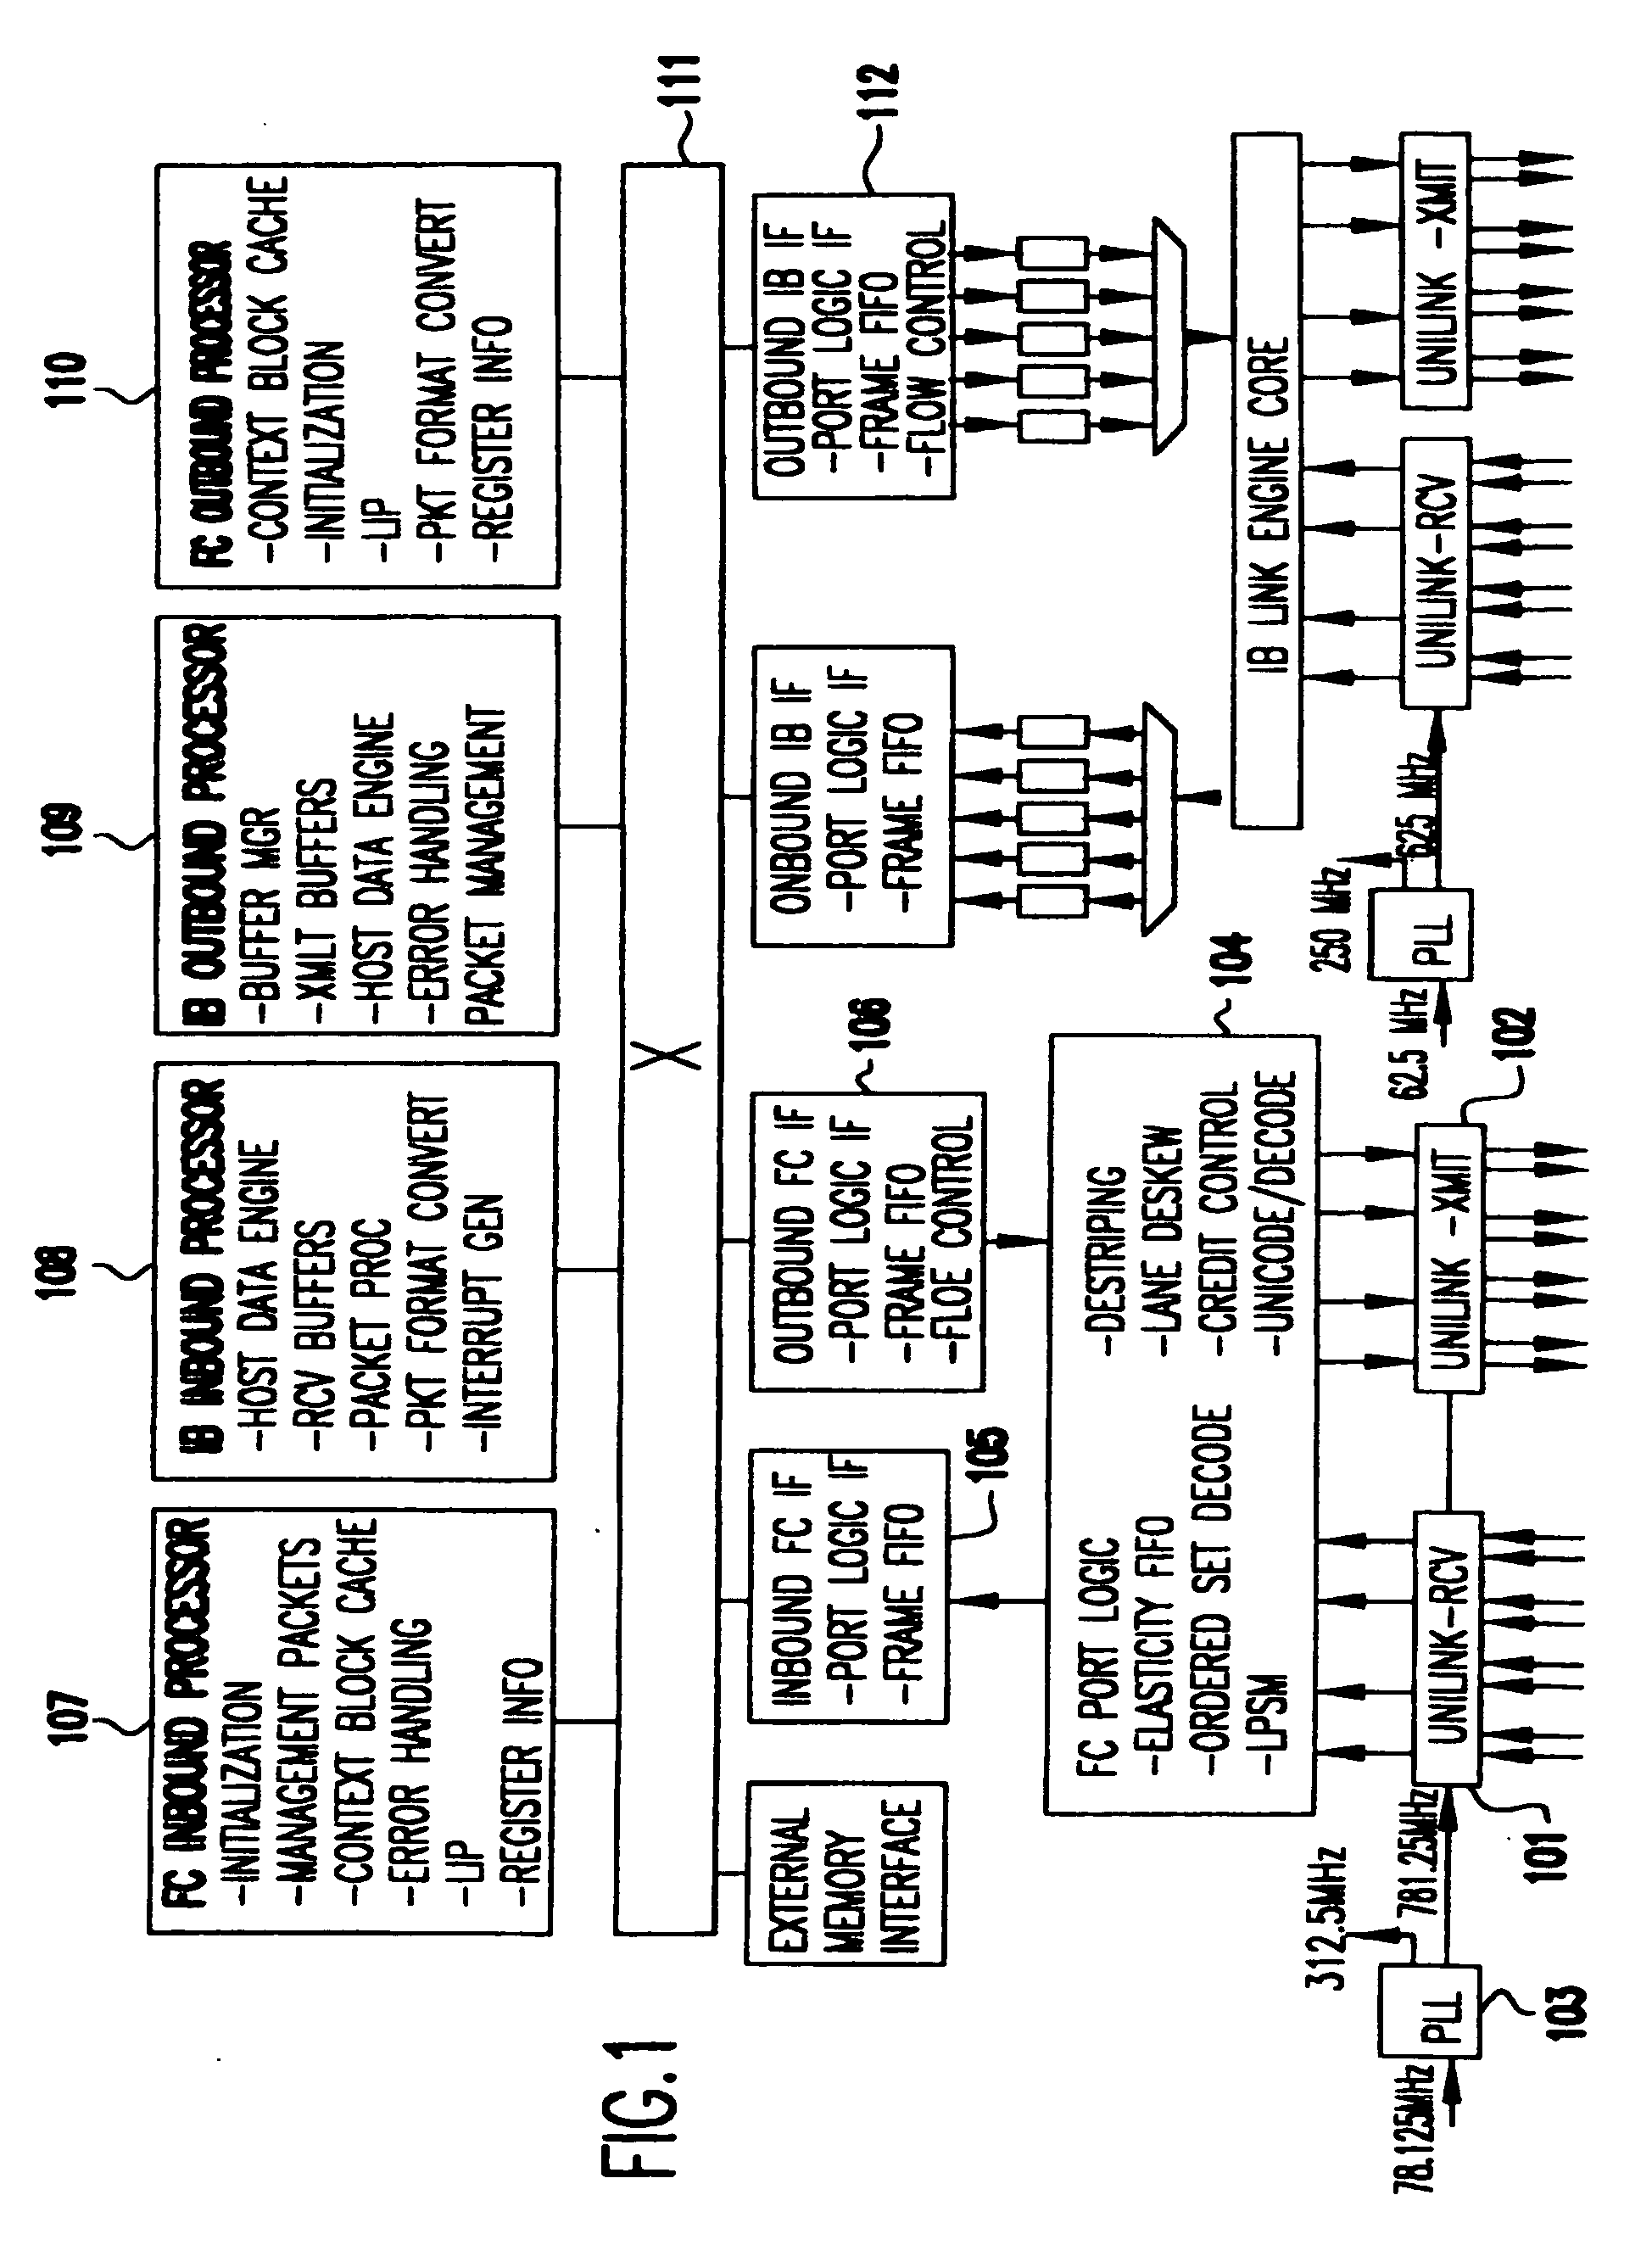 Programmable network protocol handler architecture